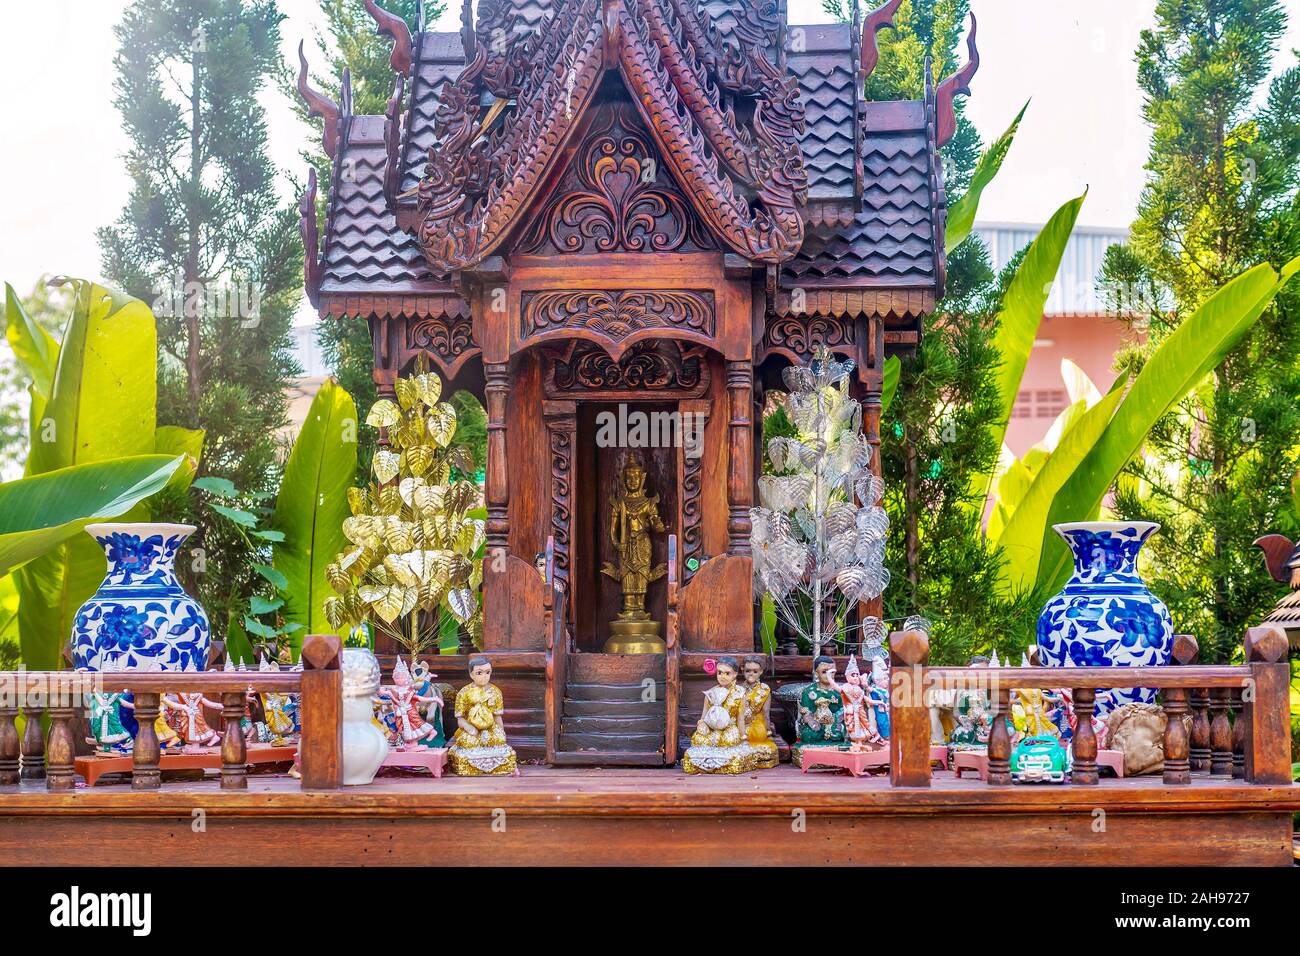 A Thai spirit house, a small replica of a traditional structure, where the deity or spiritual guardian of the property lives and offerings are made. Stock Photo